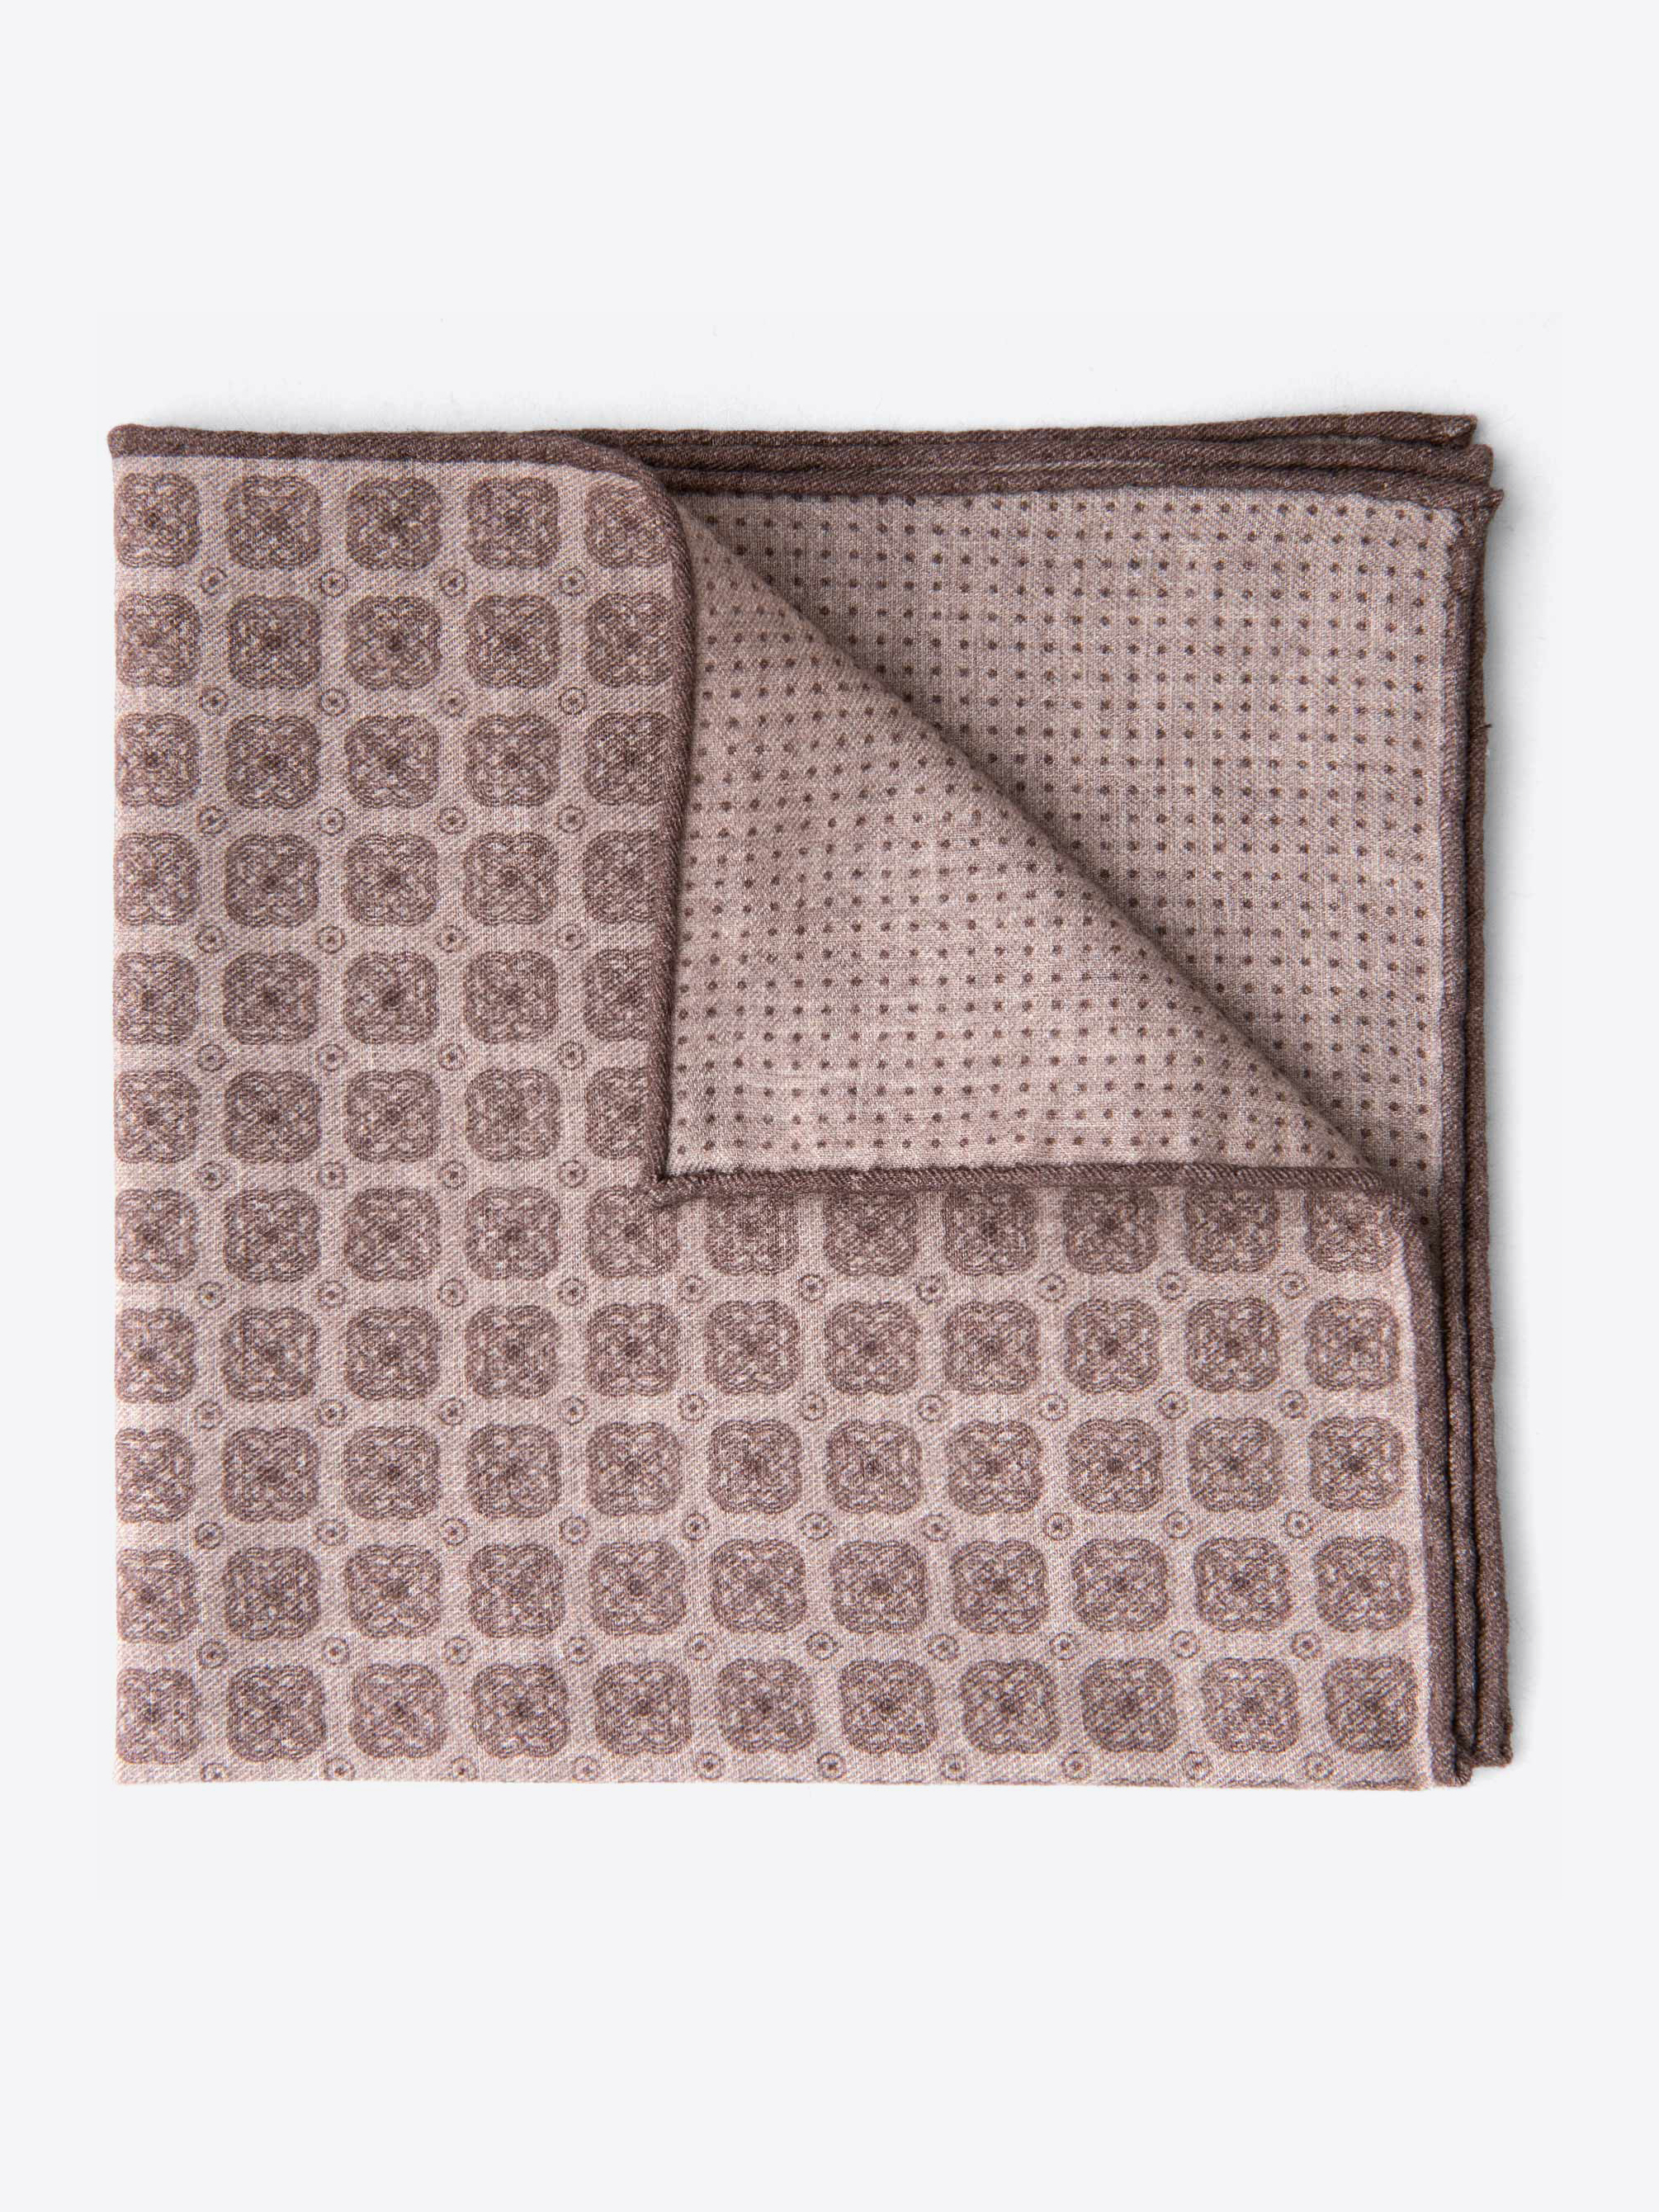 Zoom Image of Beige Printed Cotton and Wool Pocket Square